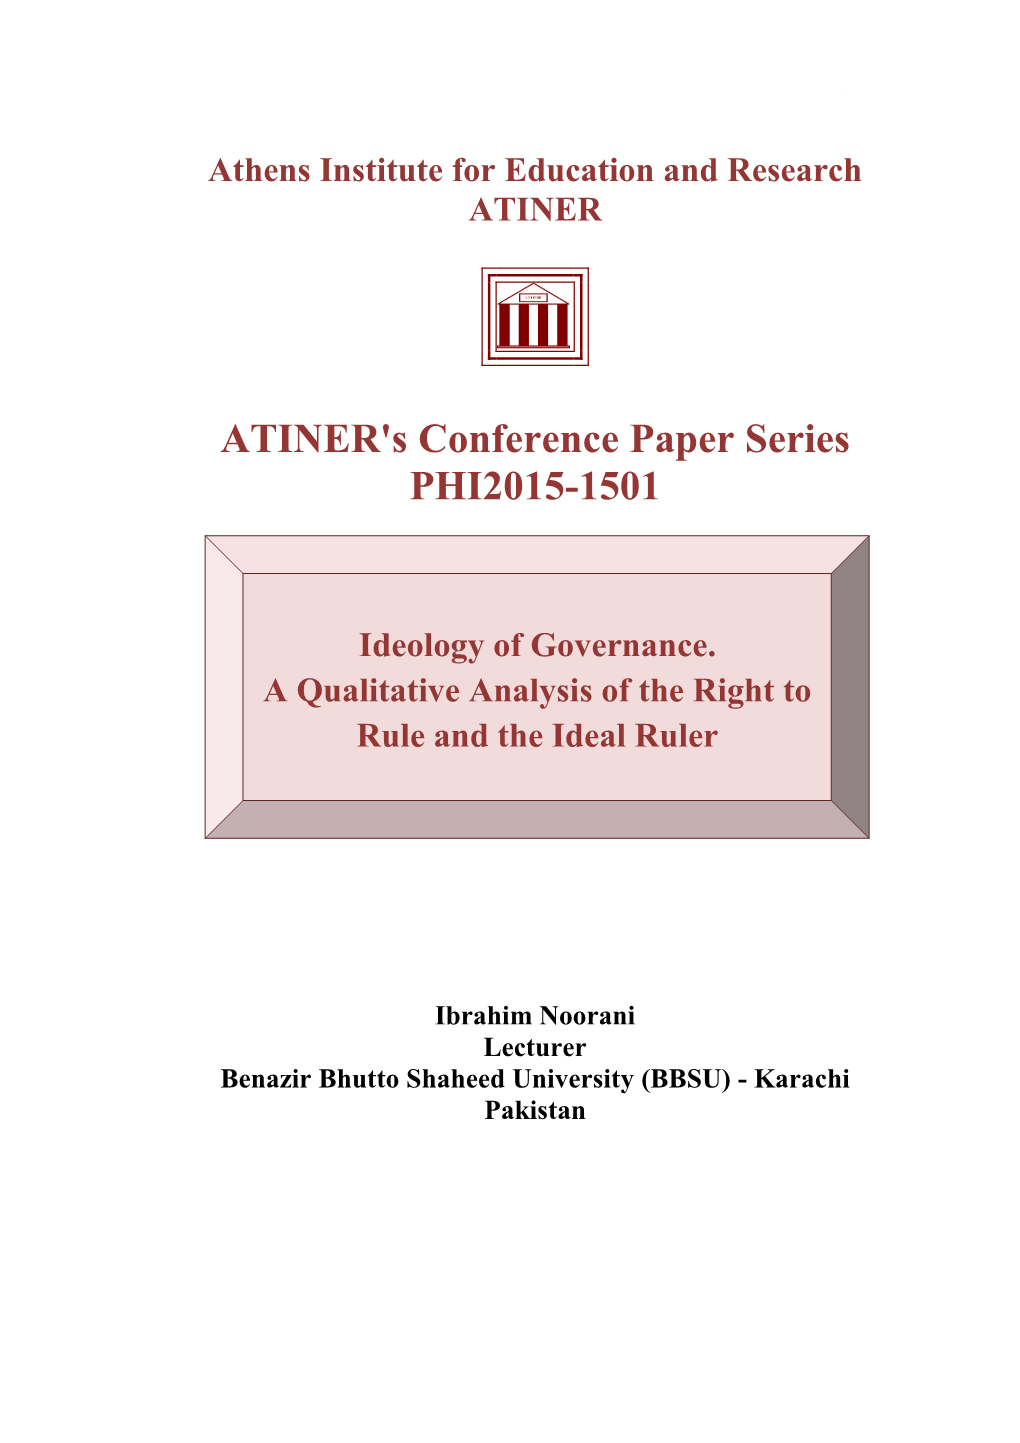 ATINER's Conference Paper Series PHI2015-1501